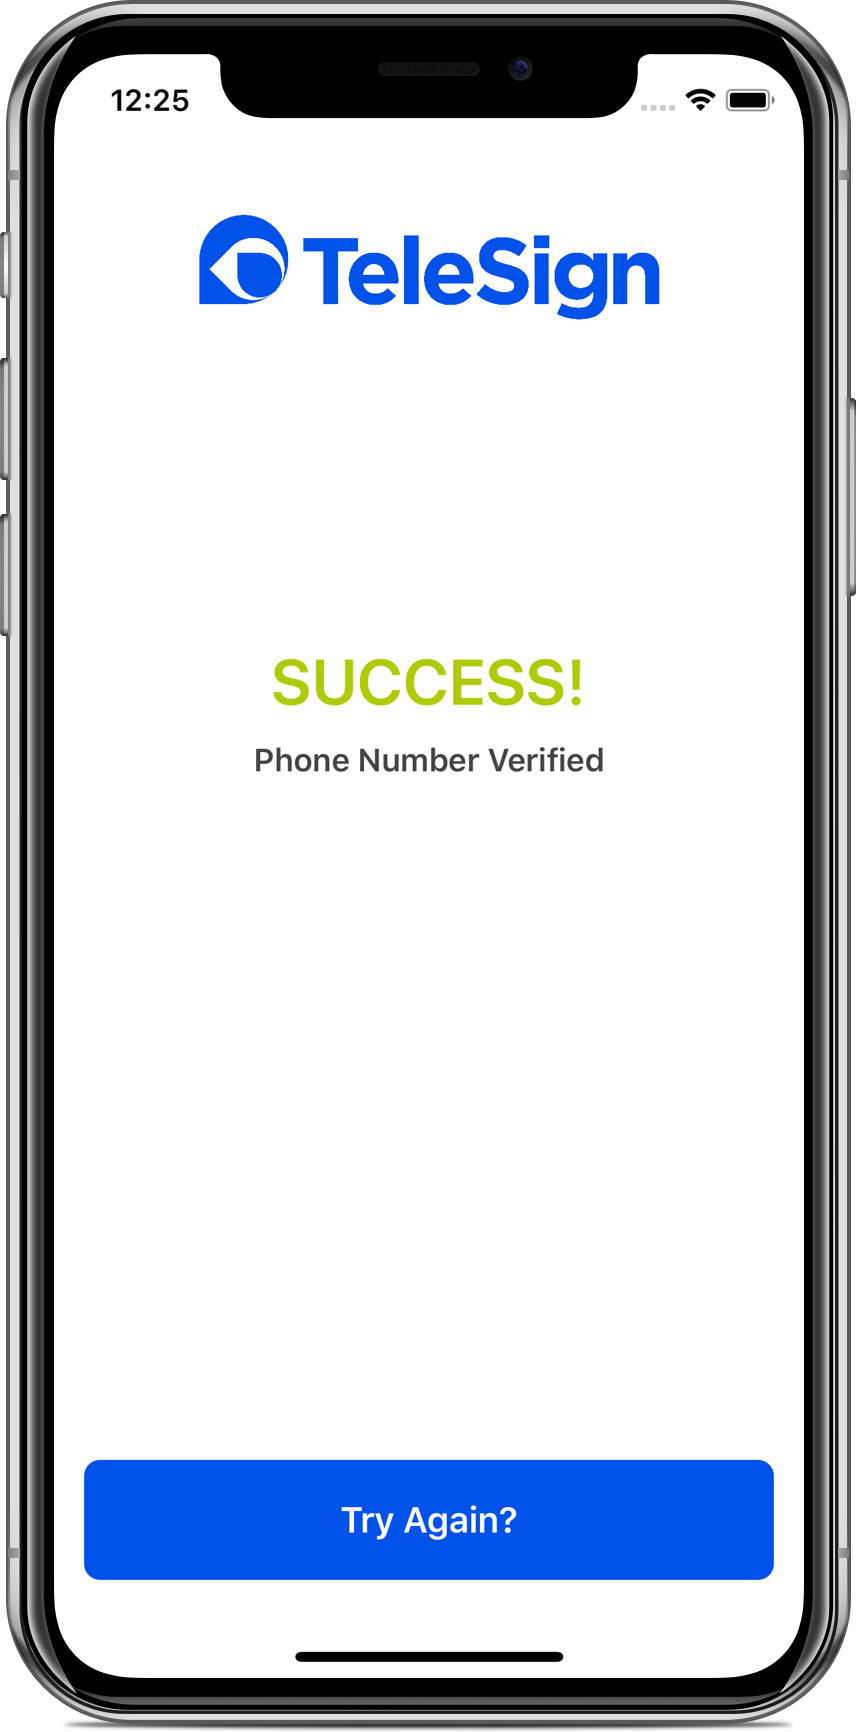 A screenshot of the screen advising the end user that the phone number was successfully verified.